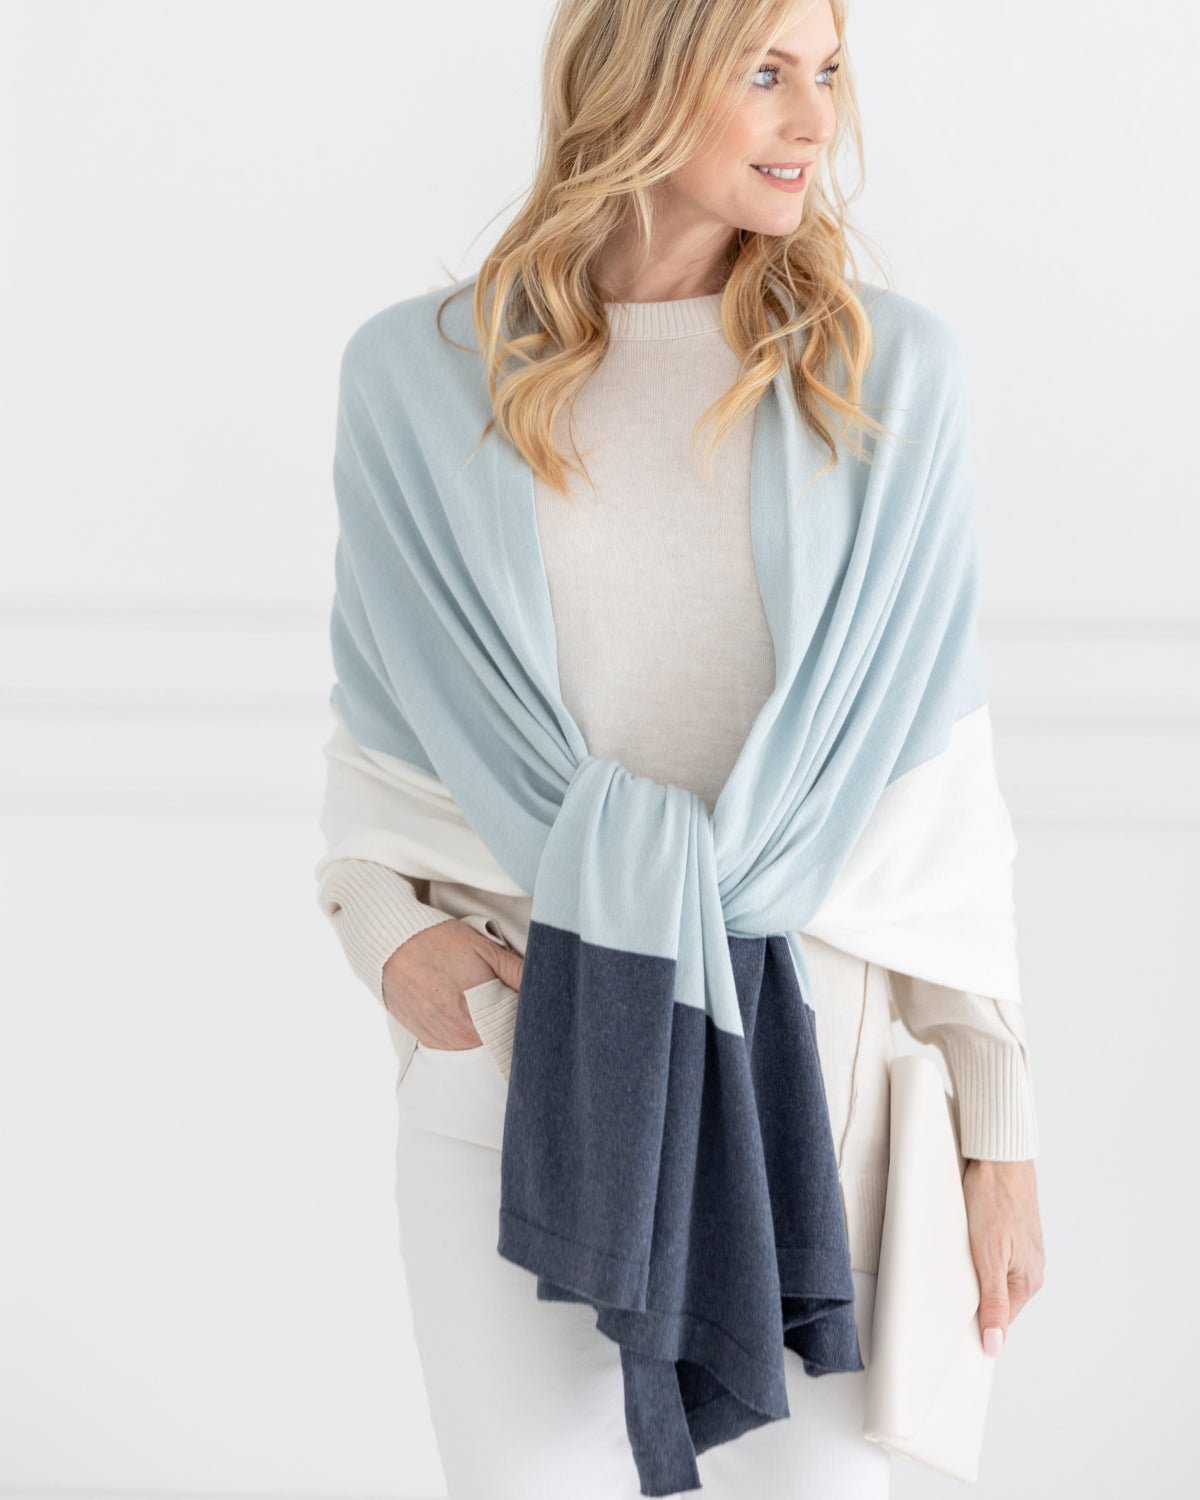 Woman  wearing the Dreamsoft Travel Scarf in Sky Blue Colorblock which is a light blue, gray and cream scarf, worn as a wedding knot style